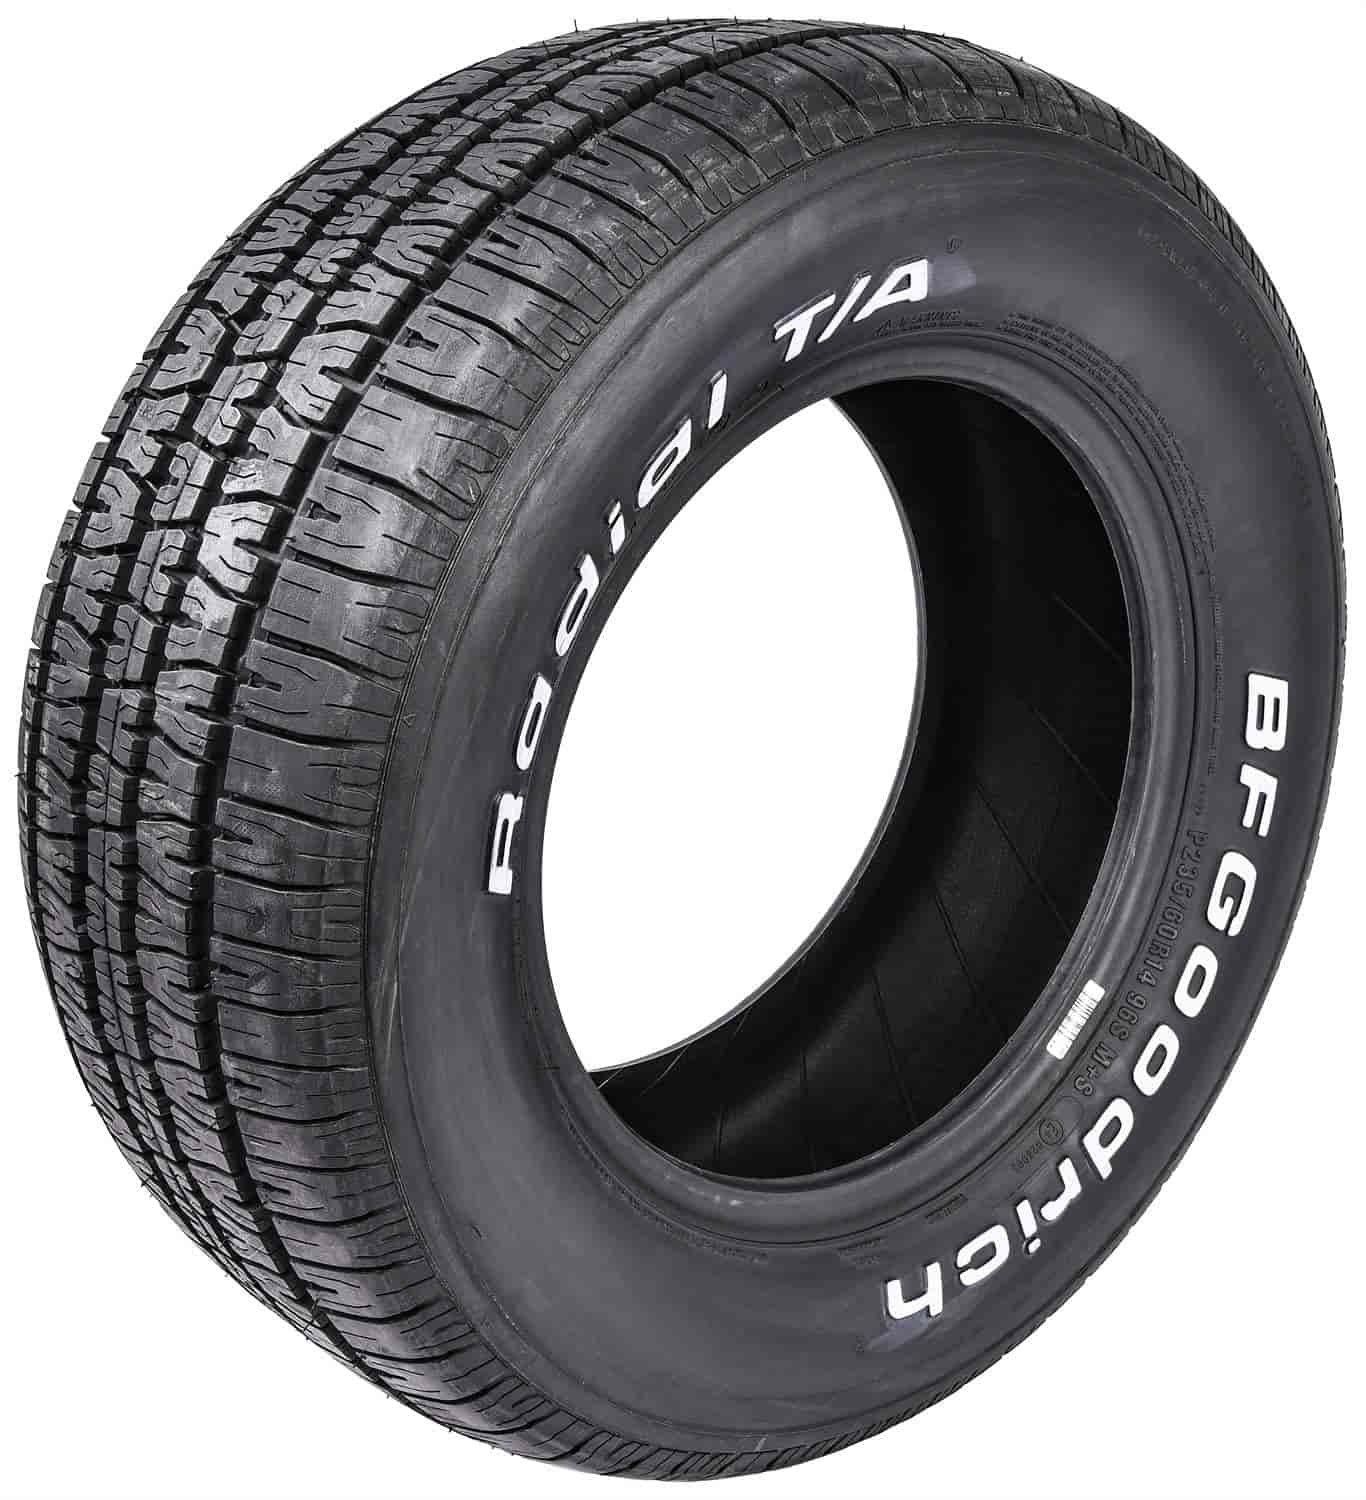 Radial T/A Tire P235/60R14